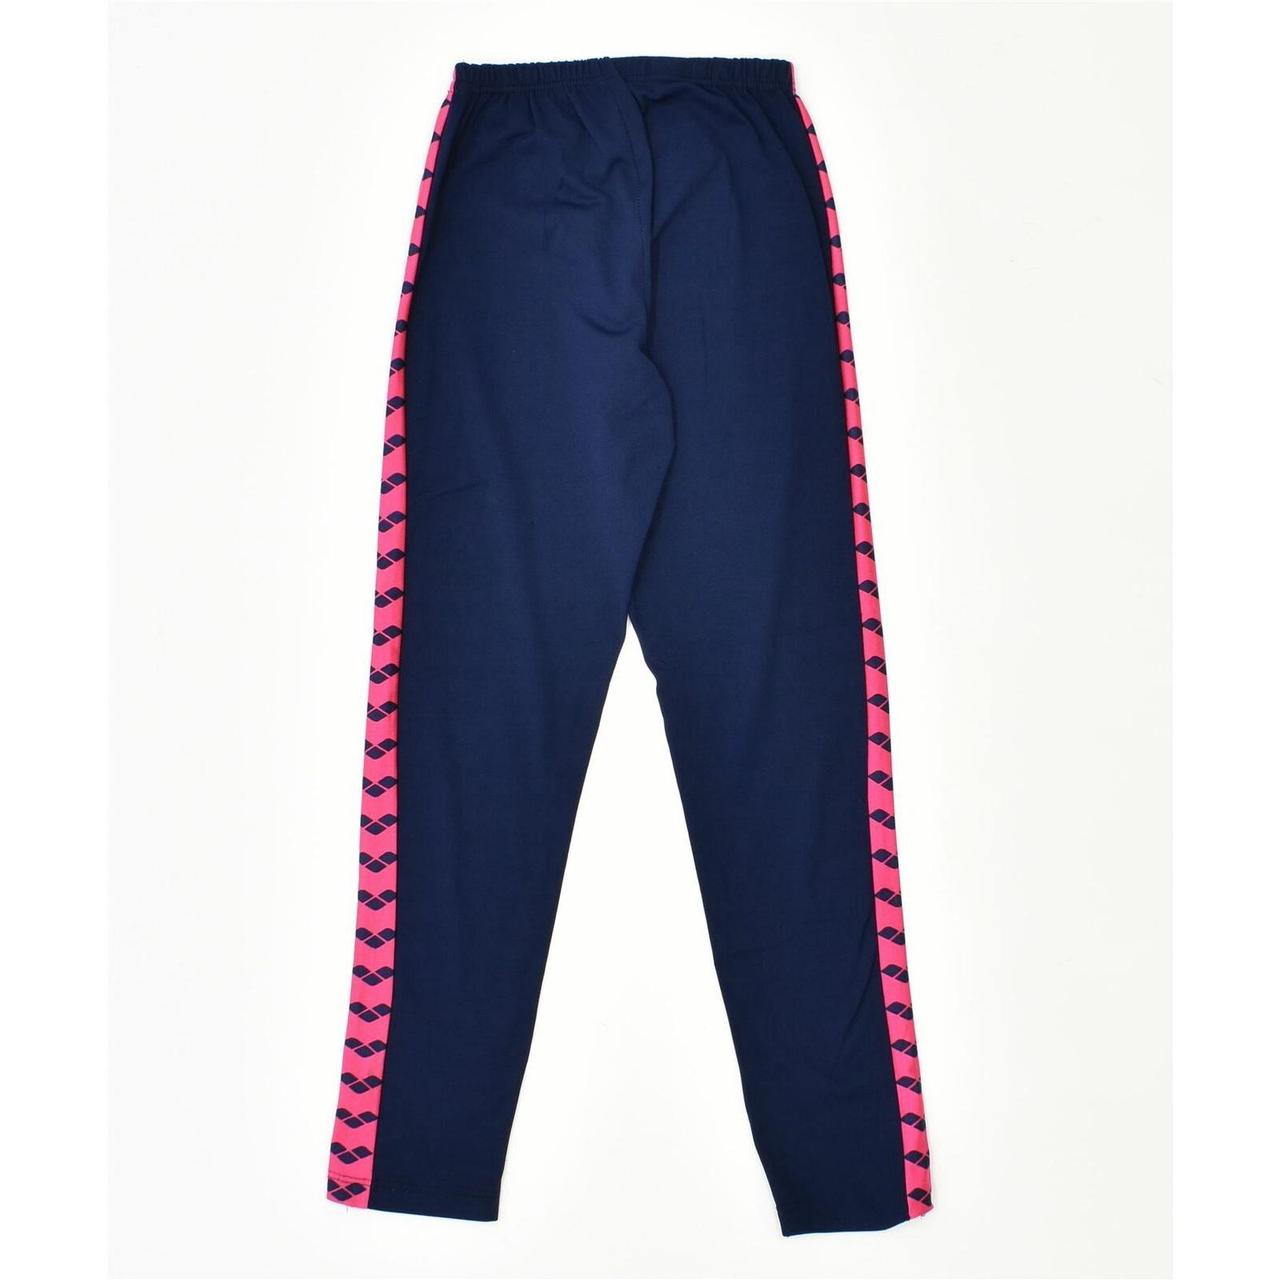 Product Image 2 - ARENA Womens Tracksuit Trousers UK